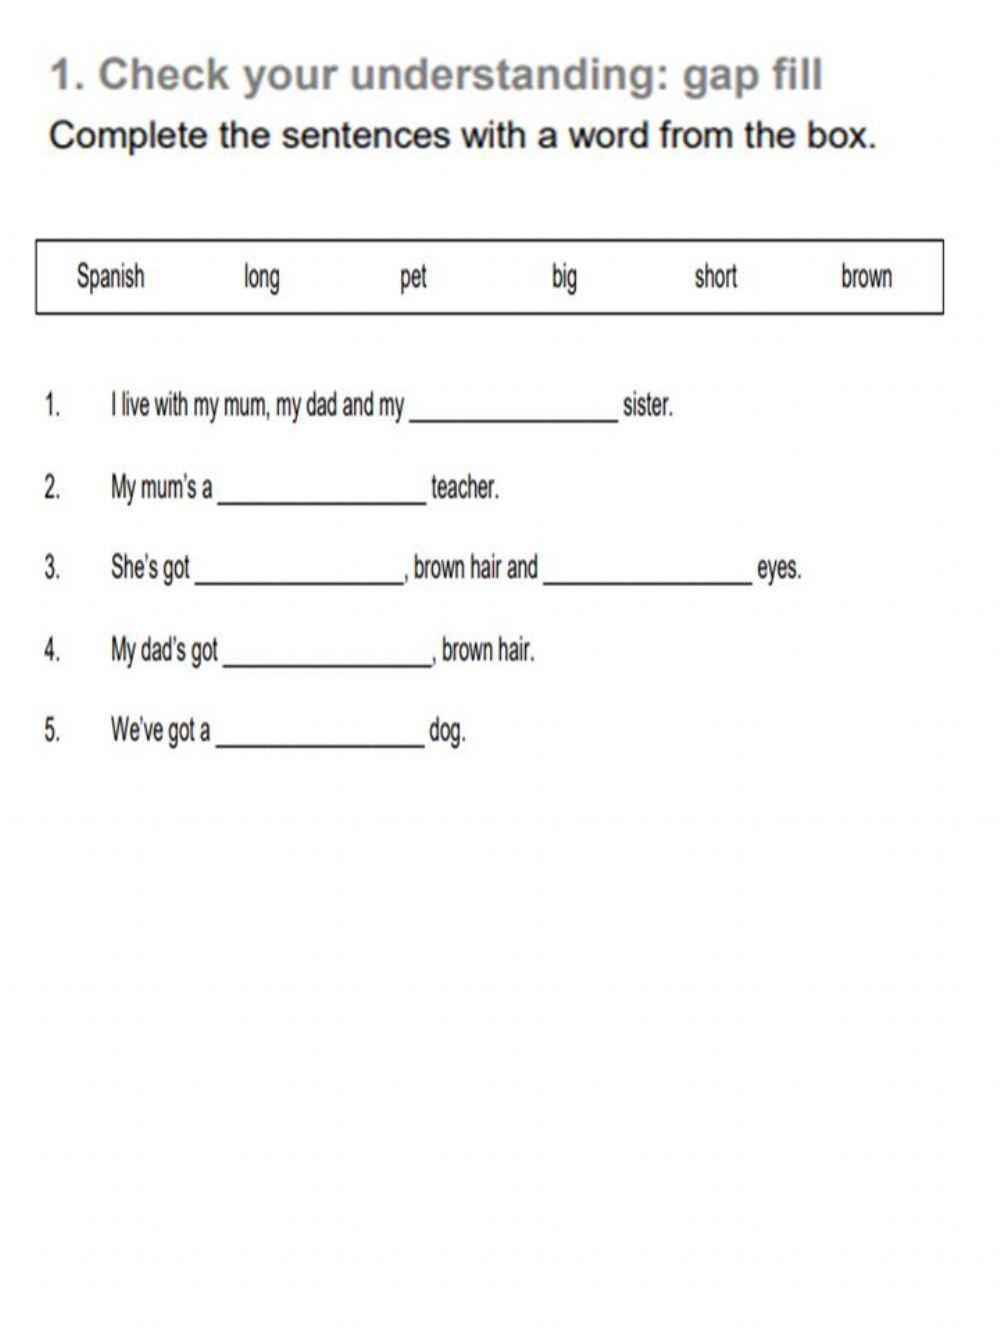 Complete the sentences with a word from the box interactive worksheet |  Live Worksheets